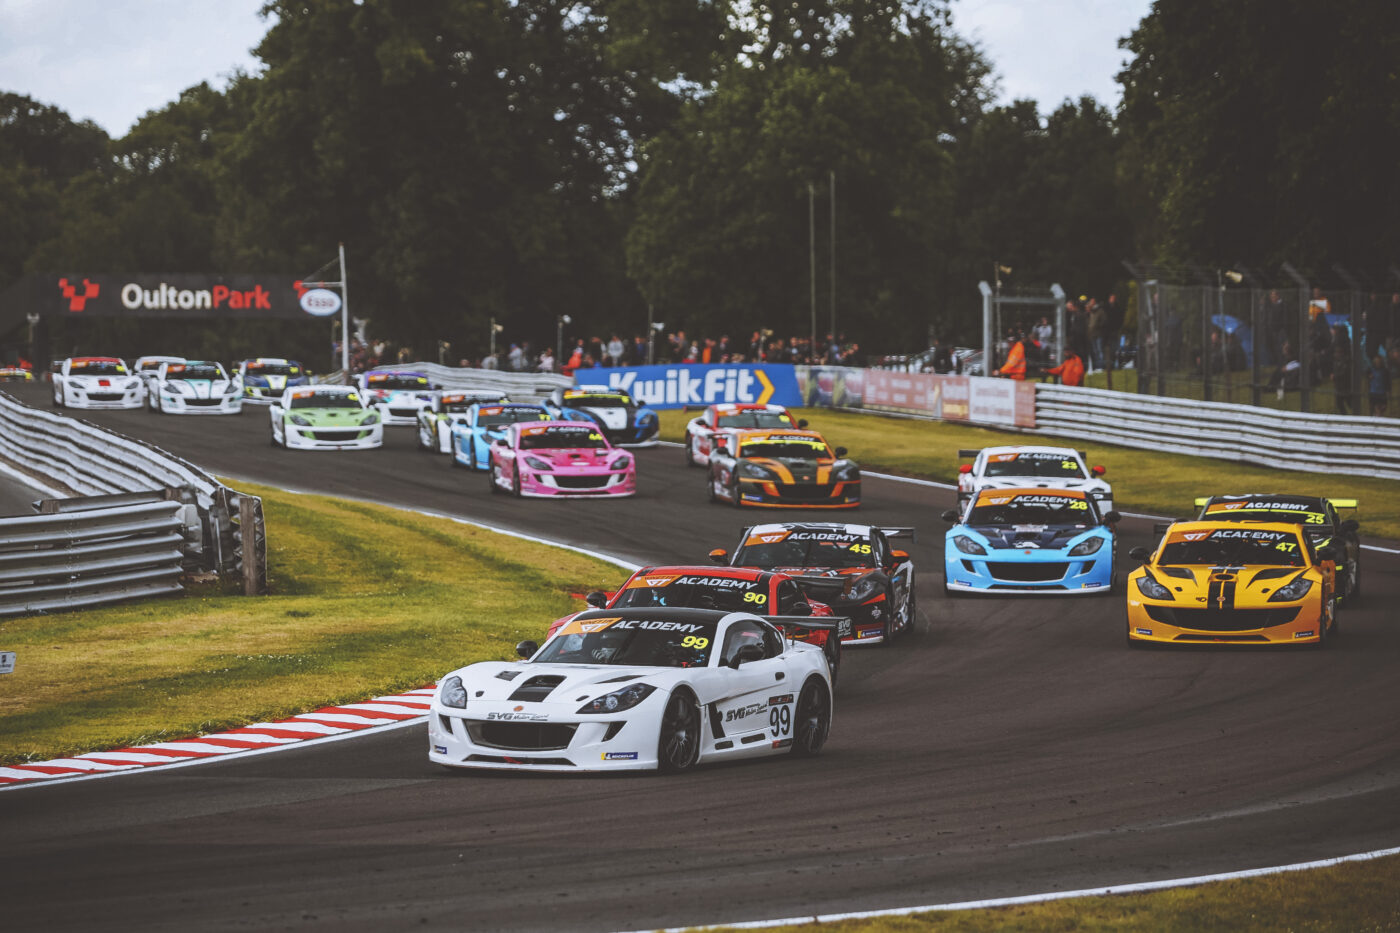 The Ginetta GT Academy returns for a new season in 2023 as the championship makes its second ever visit to the scenic Cheshire circuit